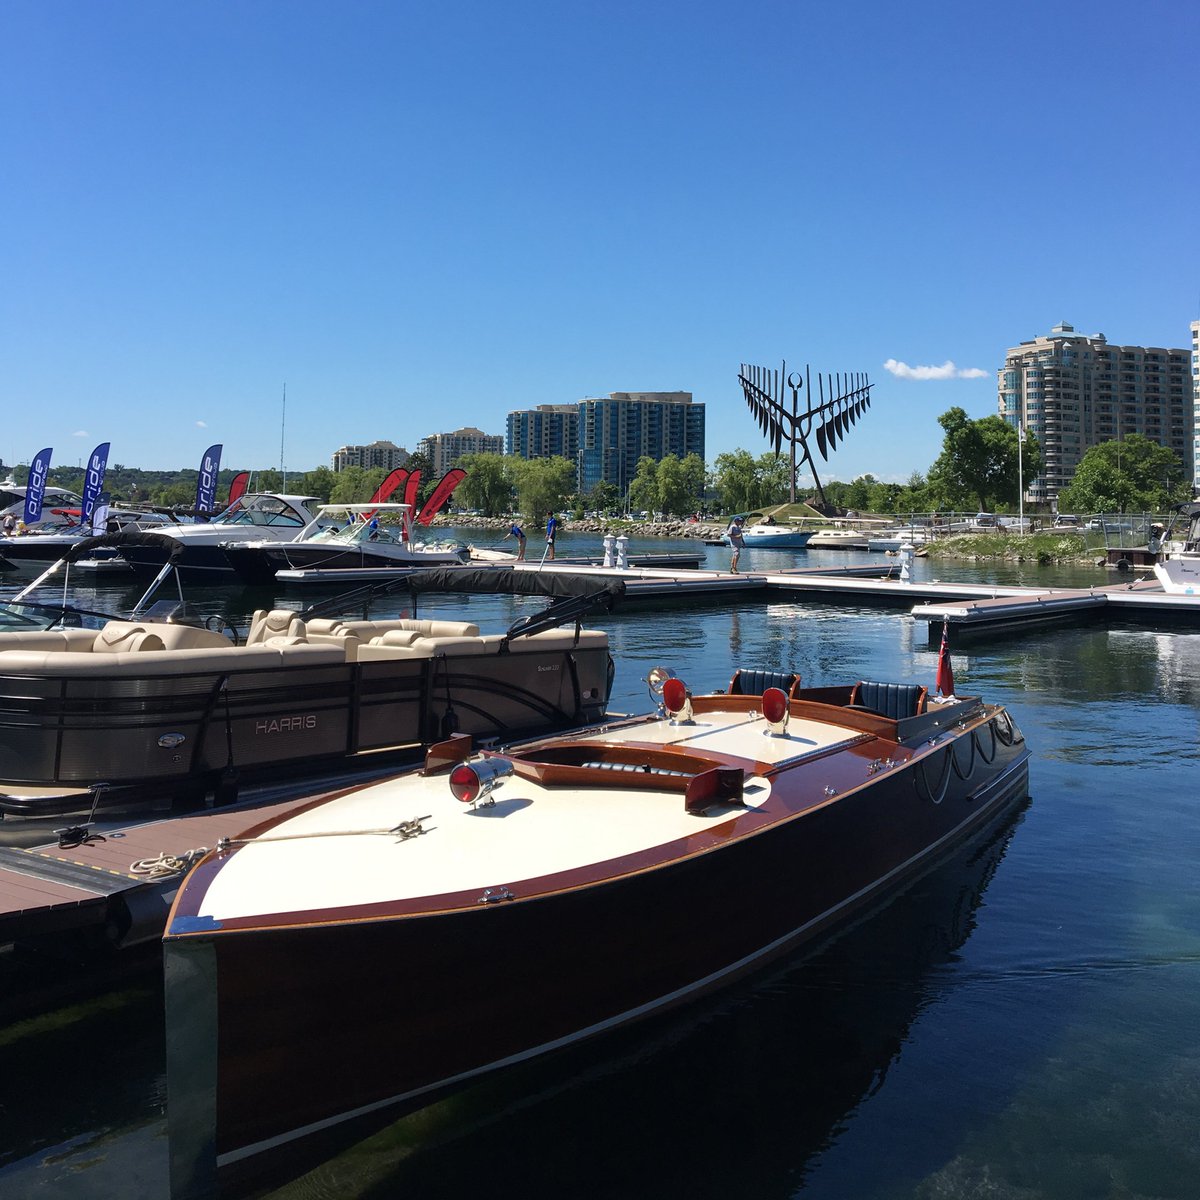 Day 2 of the second annual Barrie Boat Show starts NOW! #VisitBarrieBoatShow #ViewFromTheWater #InWaterBoatShow #LakeSimcoeBoating #BarrieBoating #BarrieBoatShow